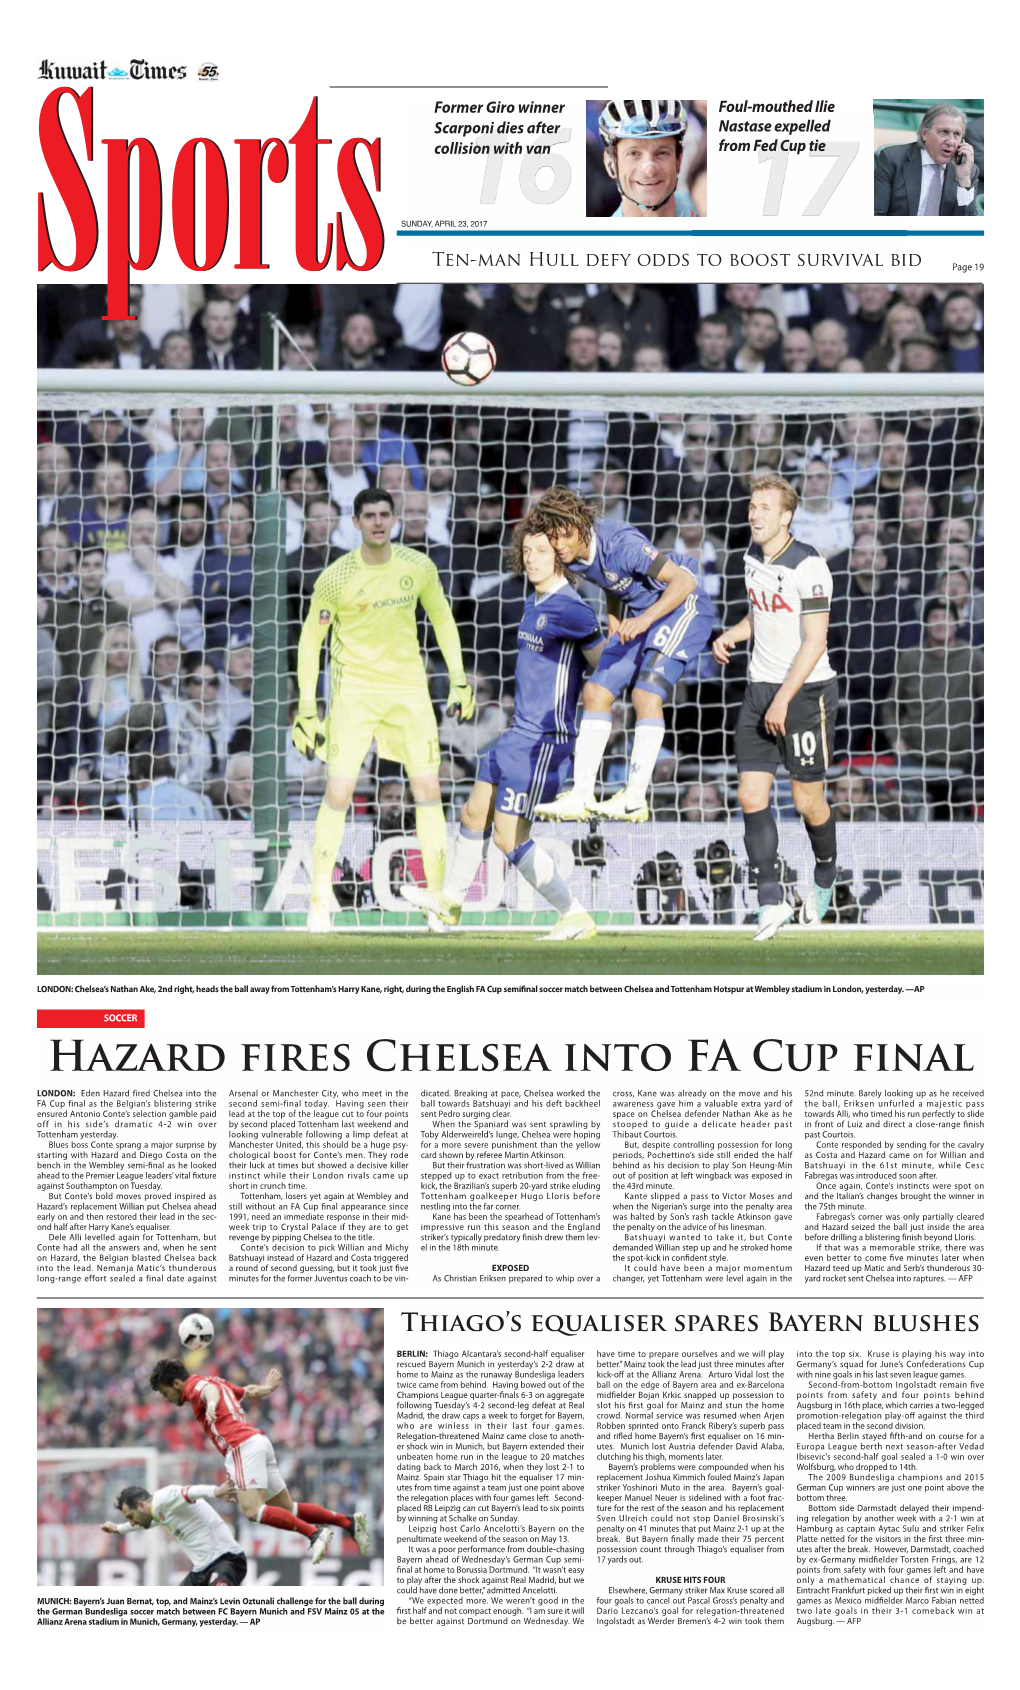 Hazard Fires Chelsea Into FA Cup Final